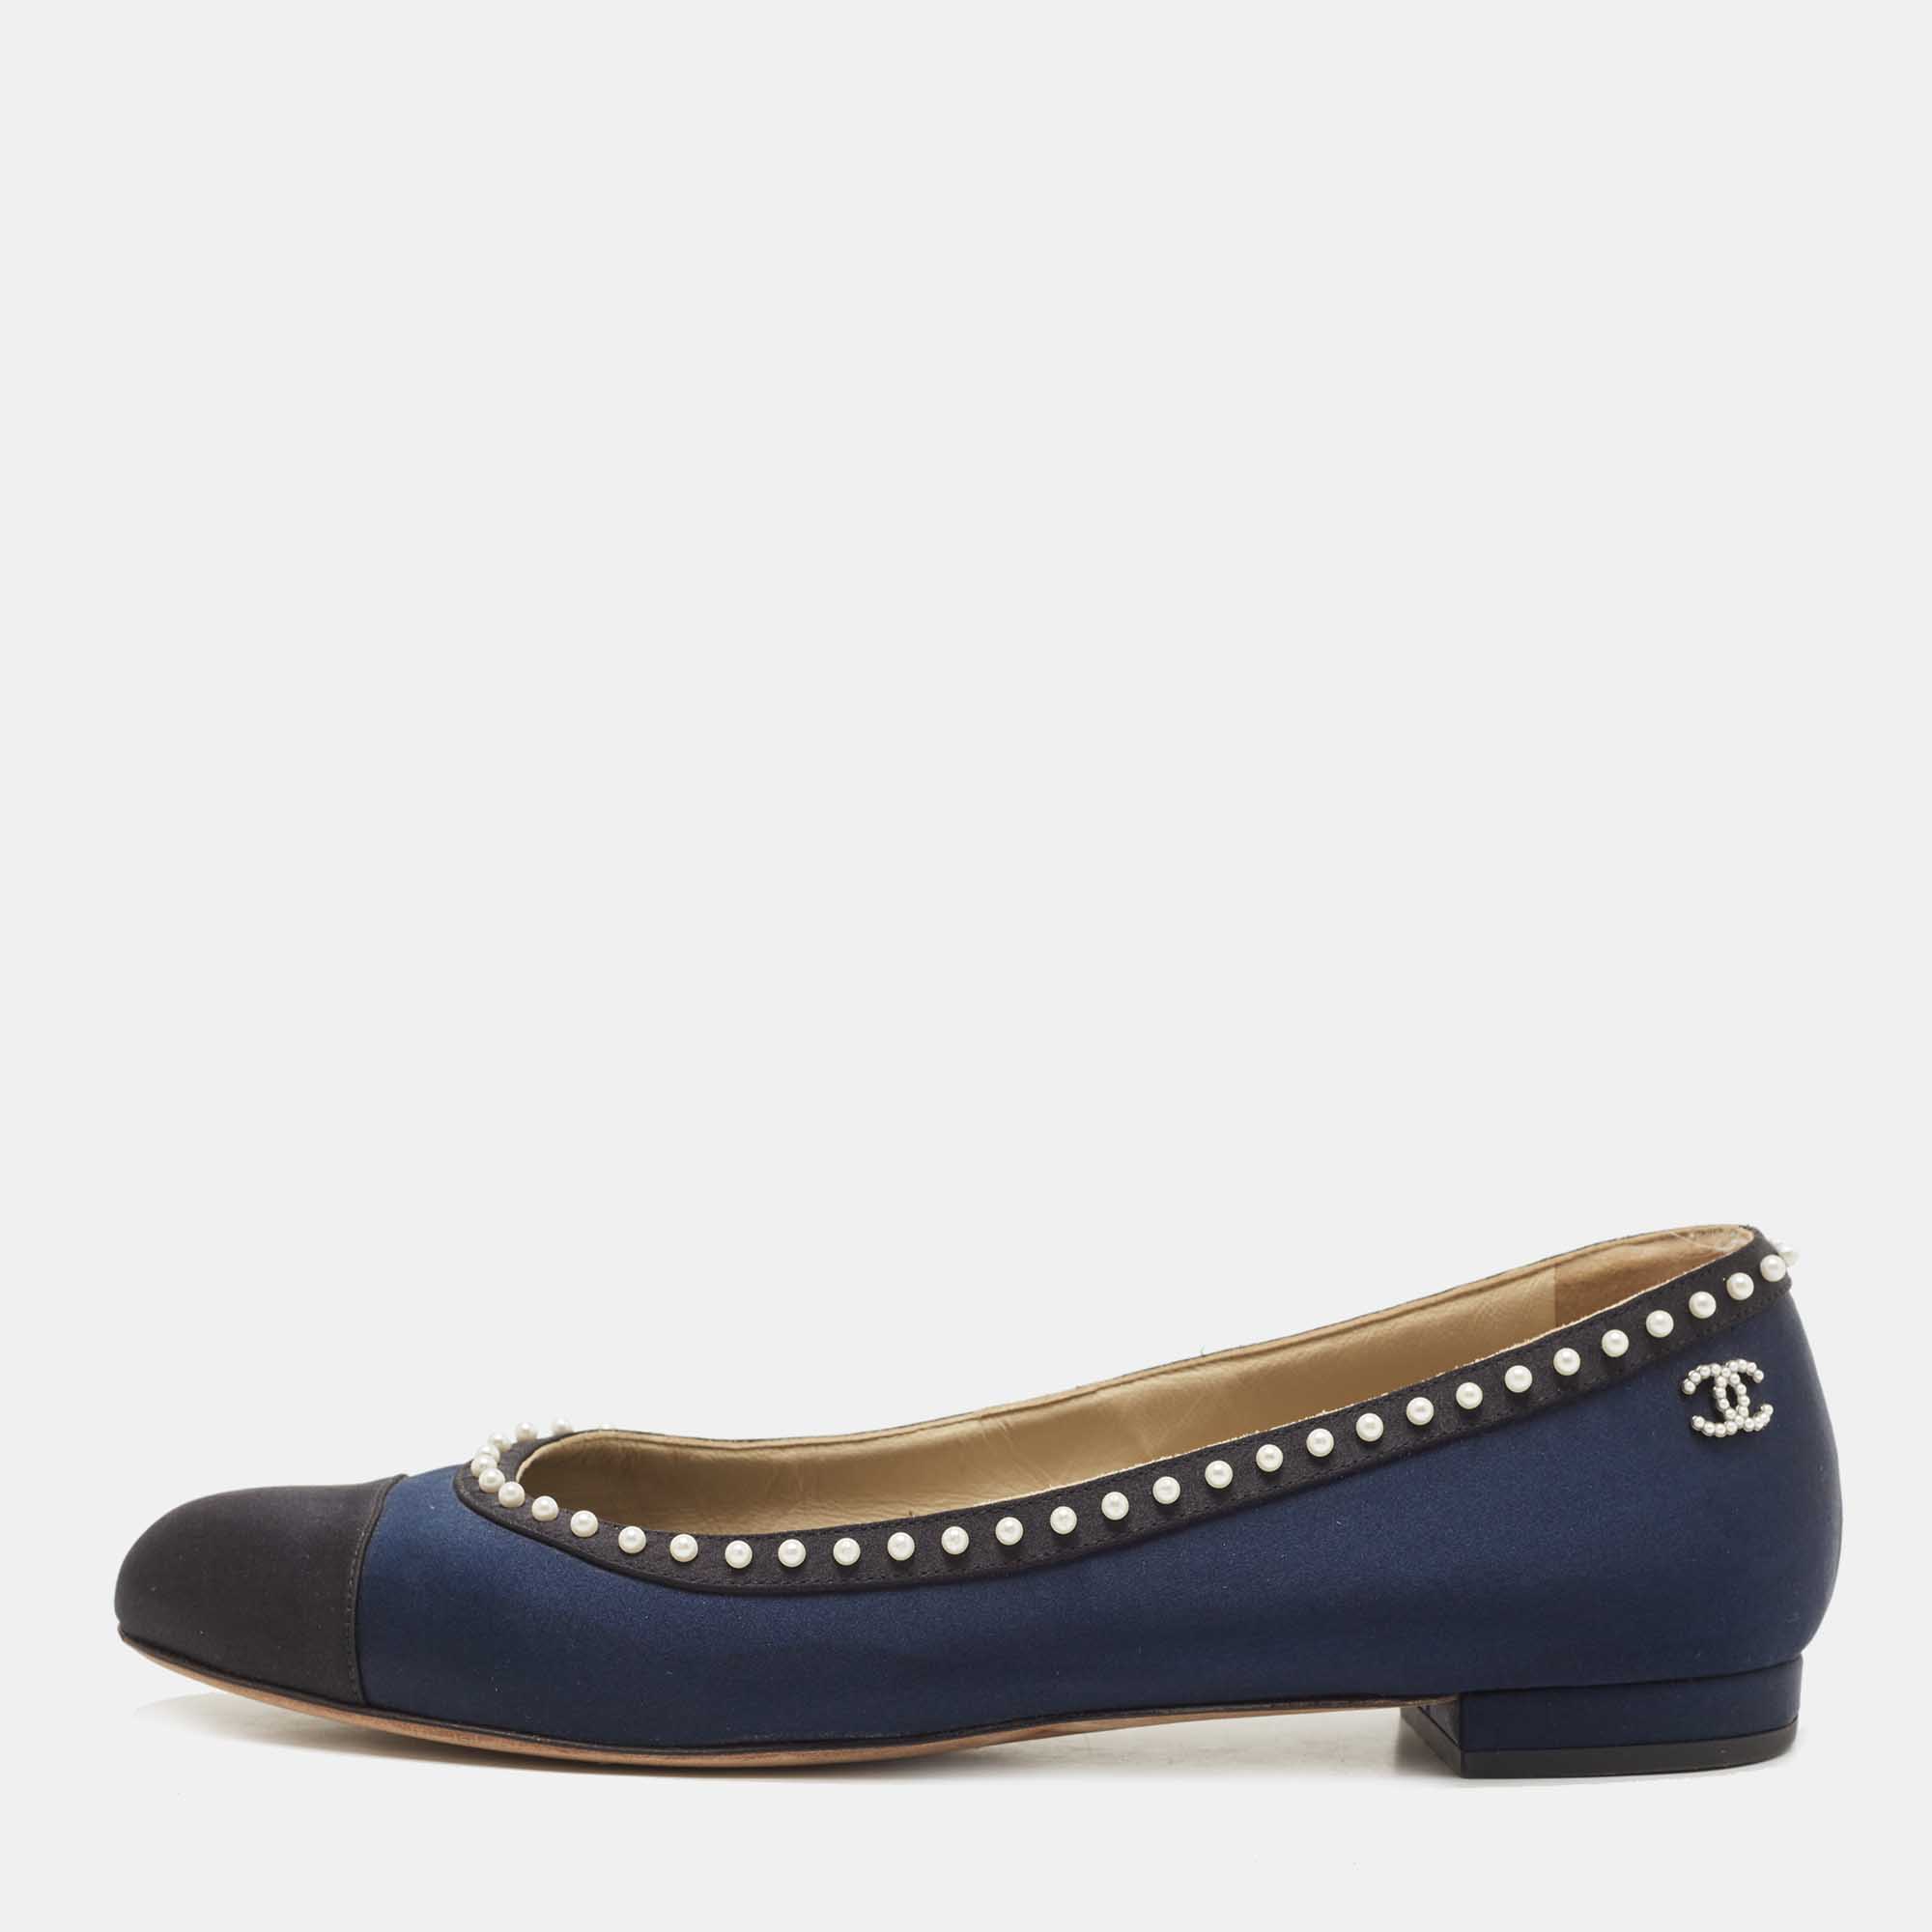 Pre-owned Chanel Navy Blue Satin Pearl Embellished Cap Toe Ballet Flats  Size 40